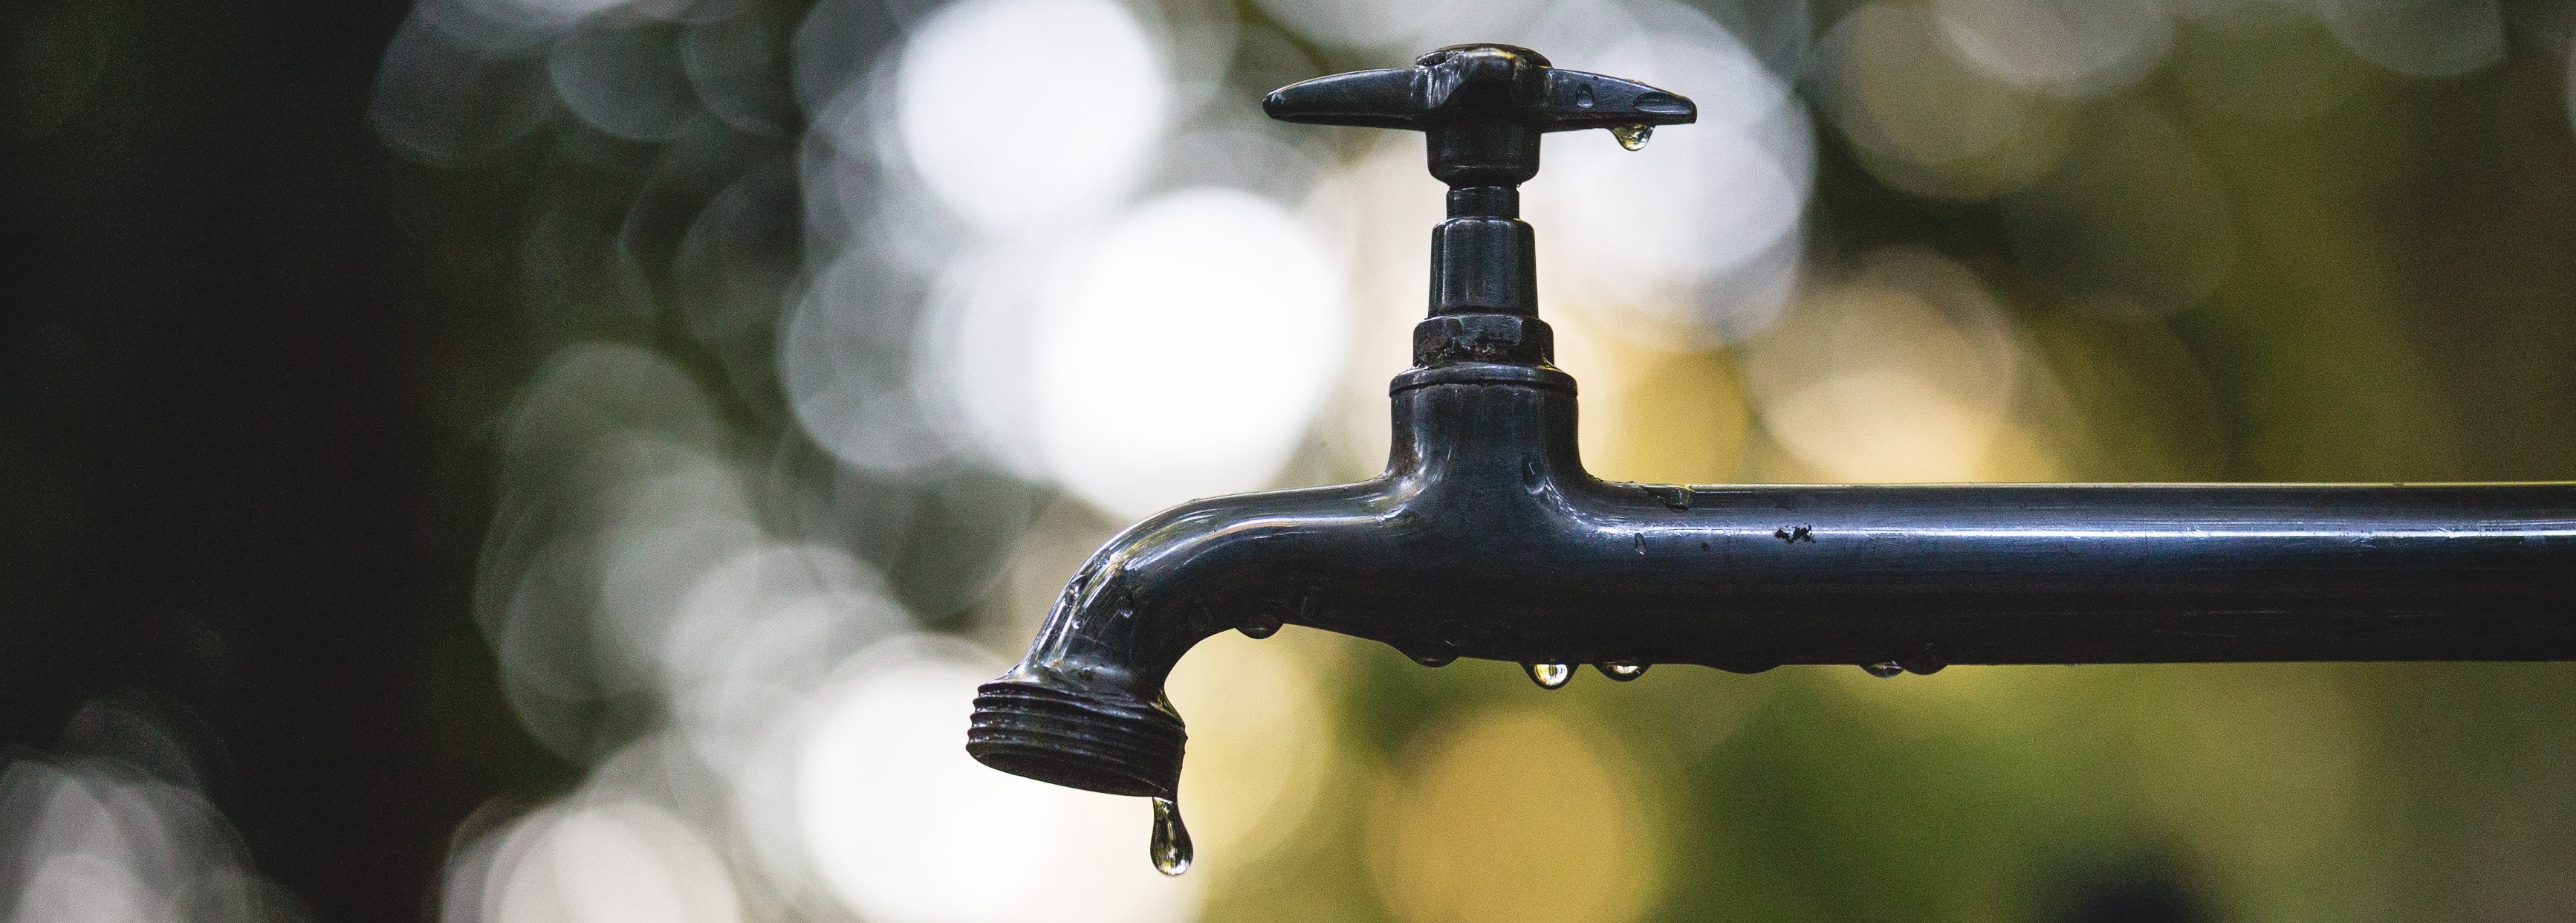 5 Simple ways to save water from South East Water